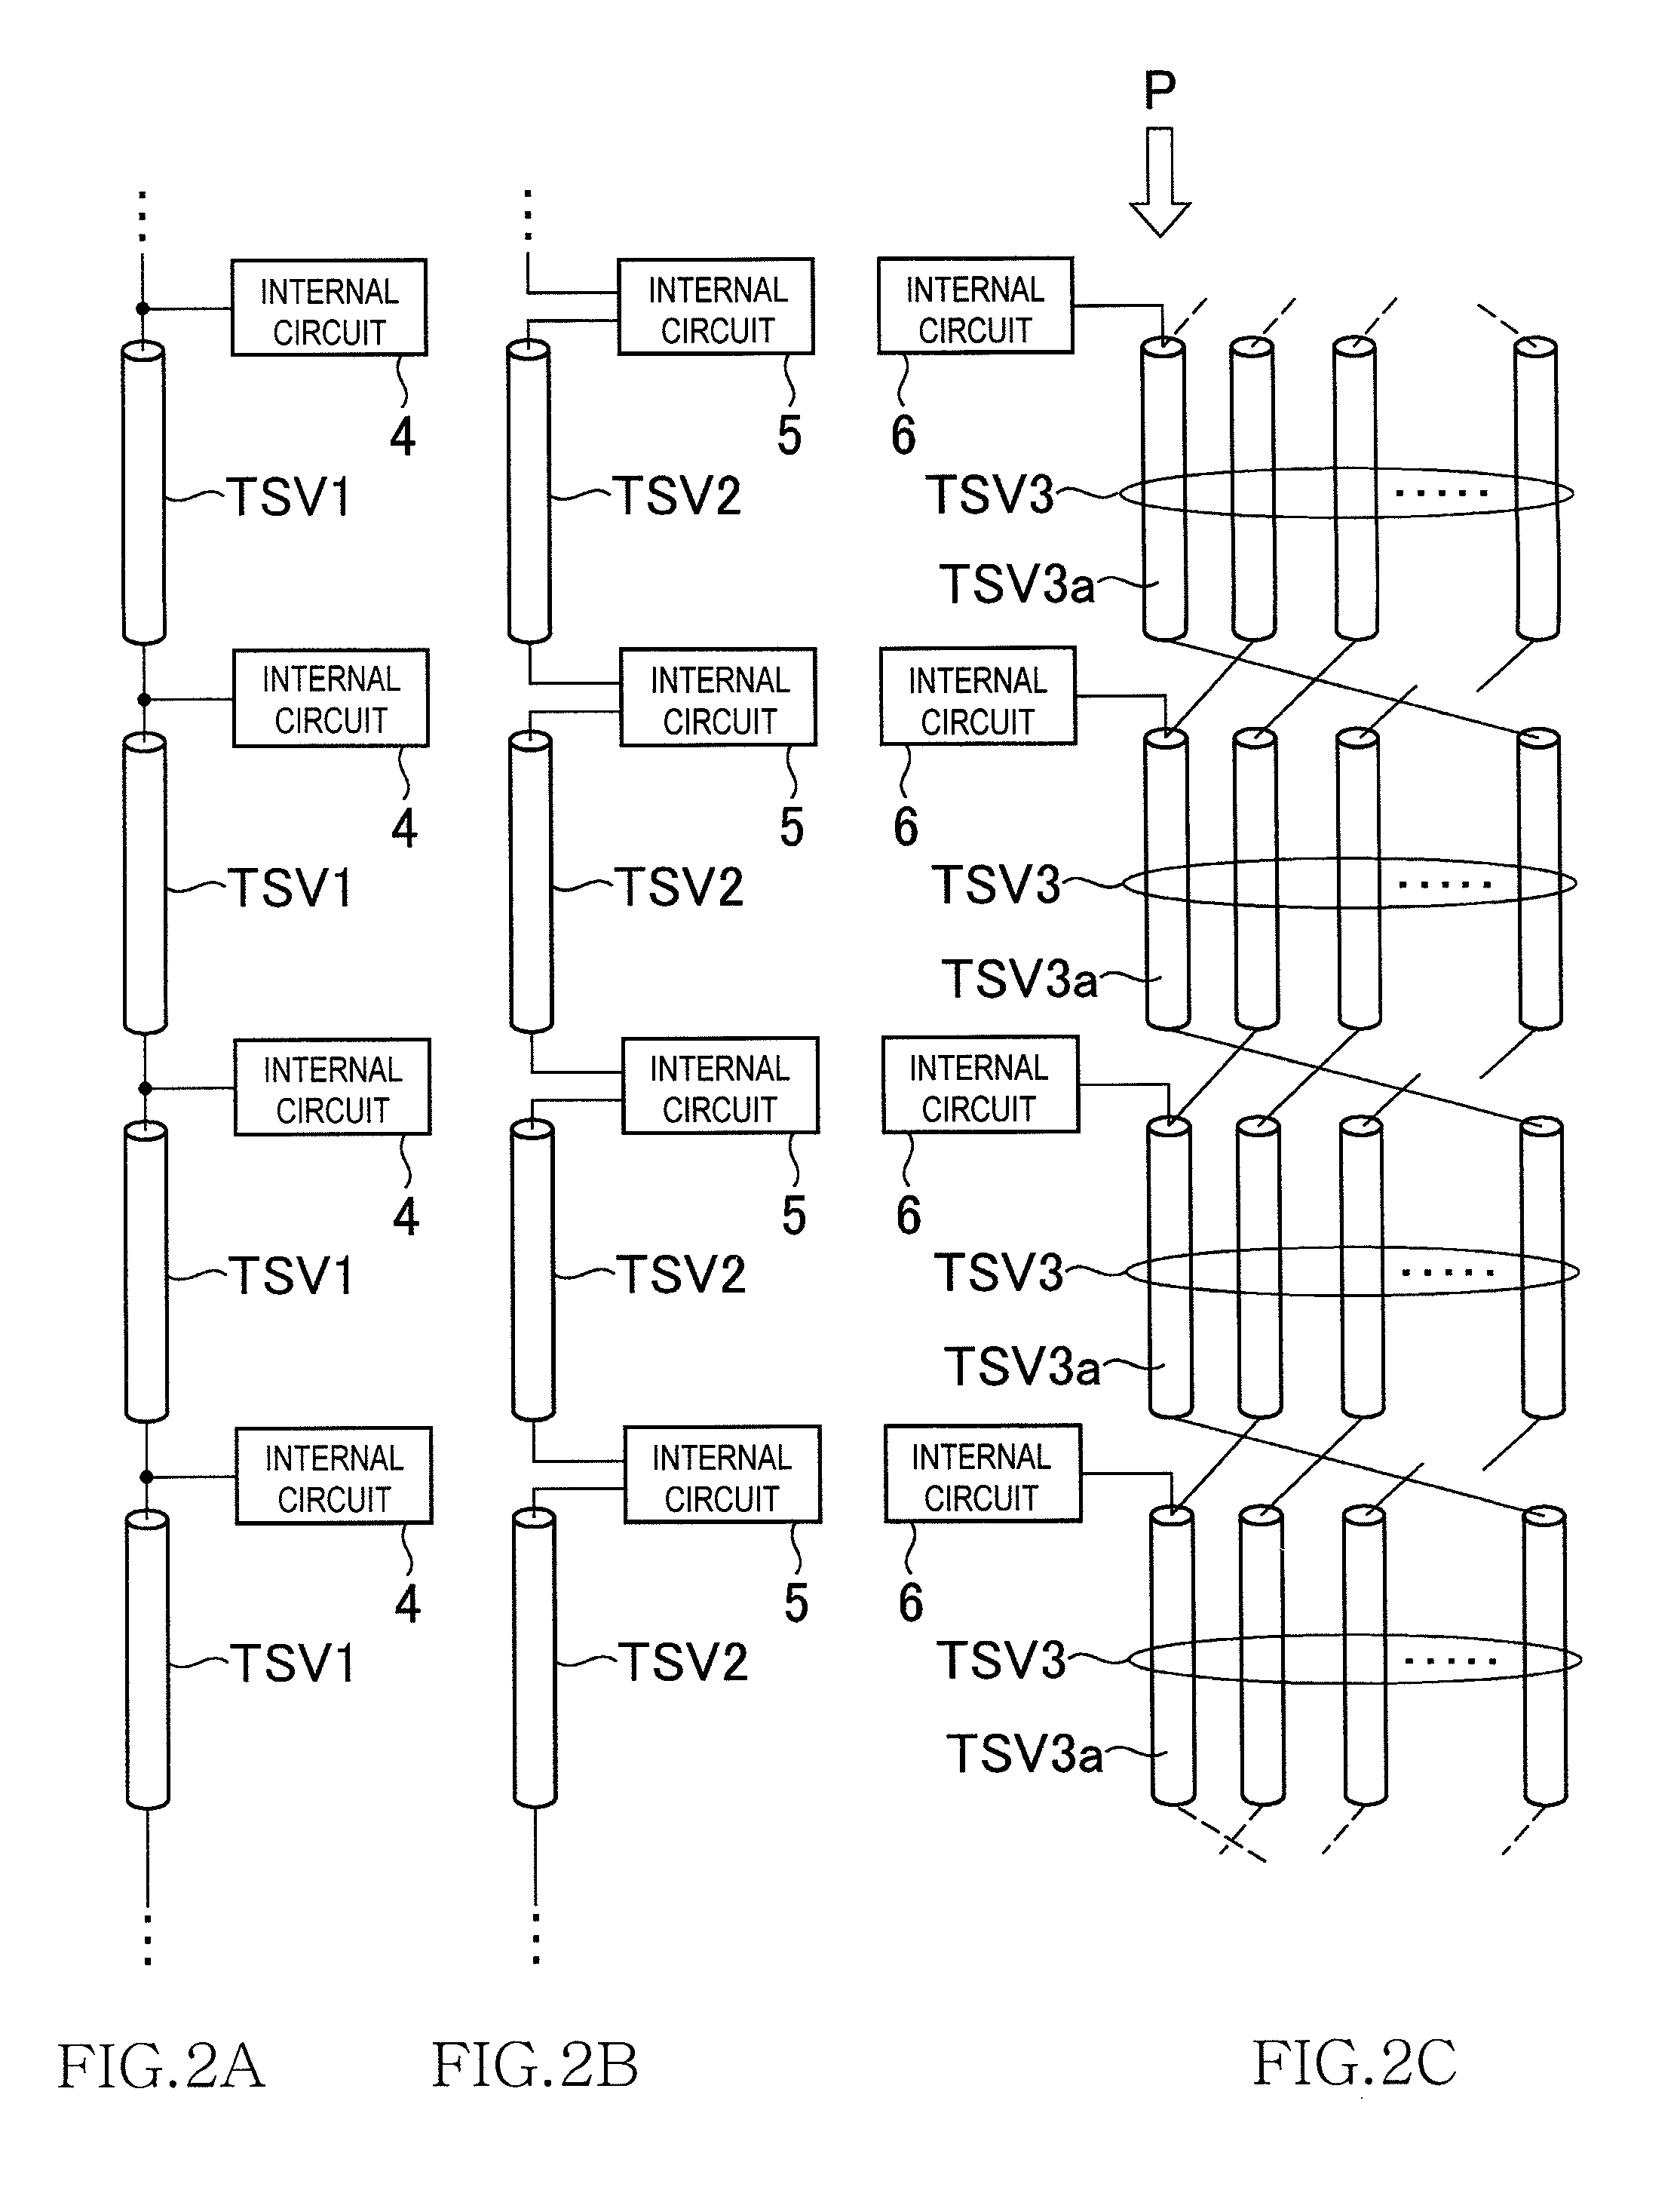 Semiconductor memory device incorporating an interface chip for selectively refreshing memory cells in core chips